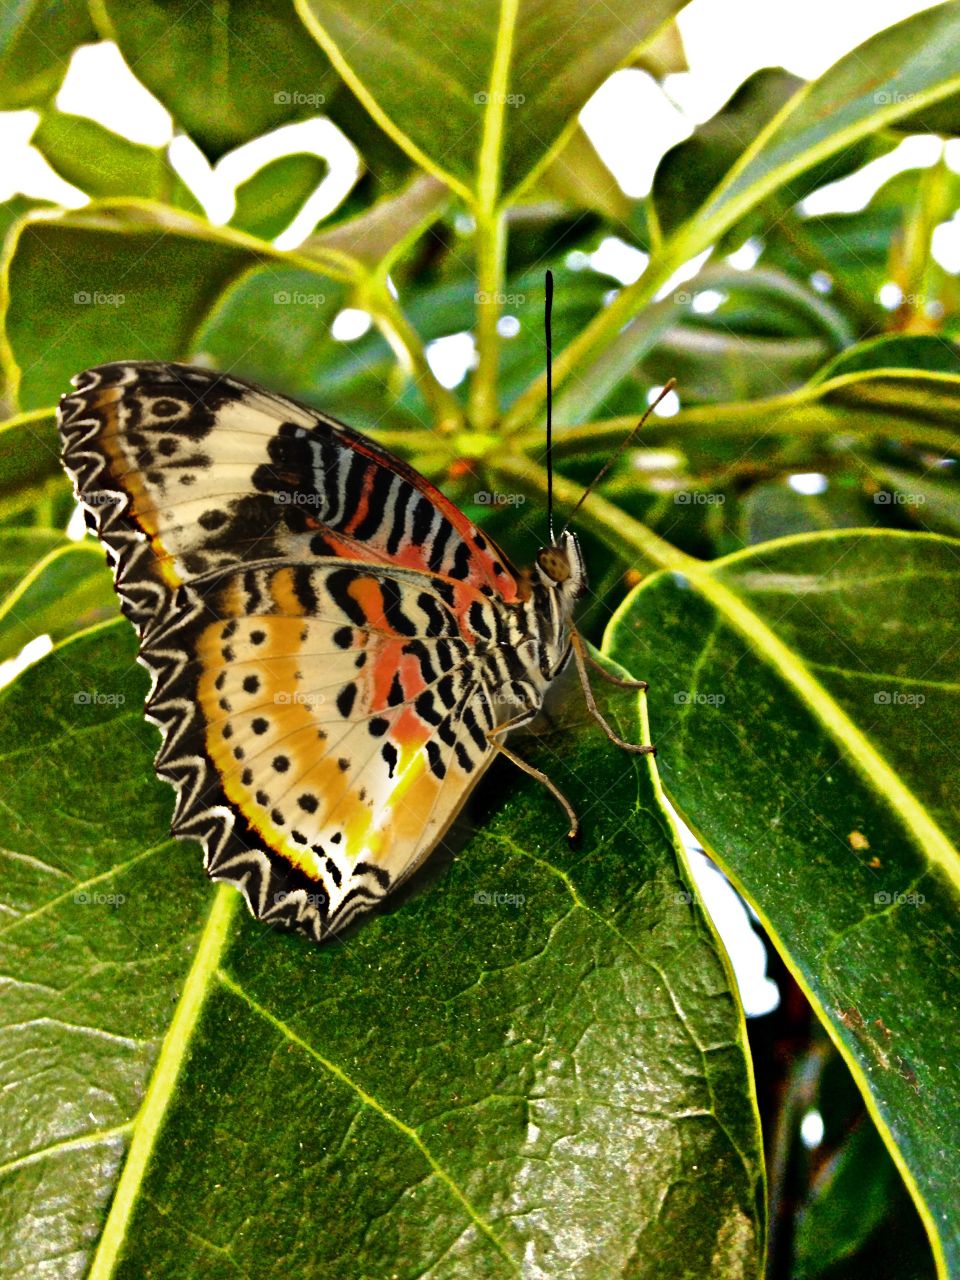 This brilliantly patterned butterfly is enjoying some sun on these bright green leaves. 